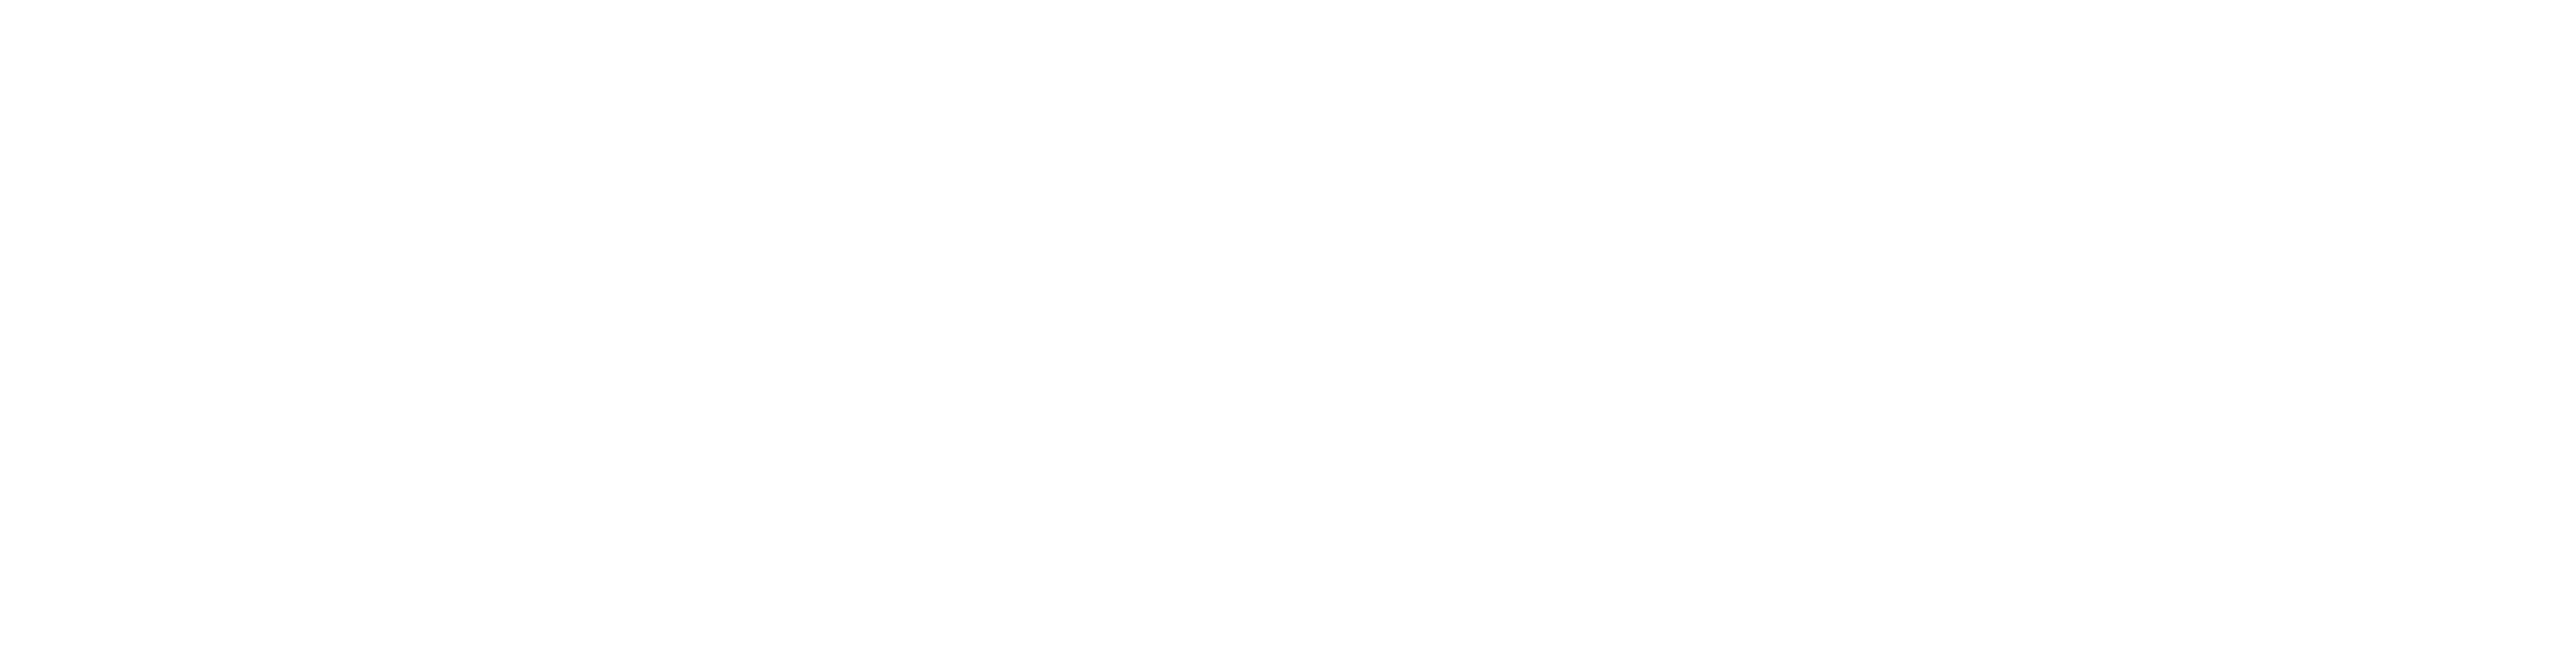 https://equinea.ch/wp-content/uploads/2020/01/cropped-new-logo-equinea.png